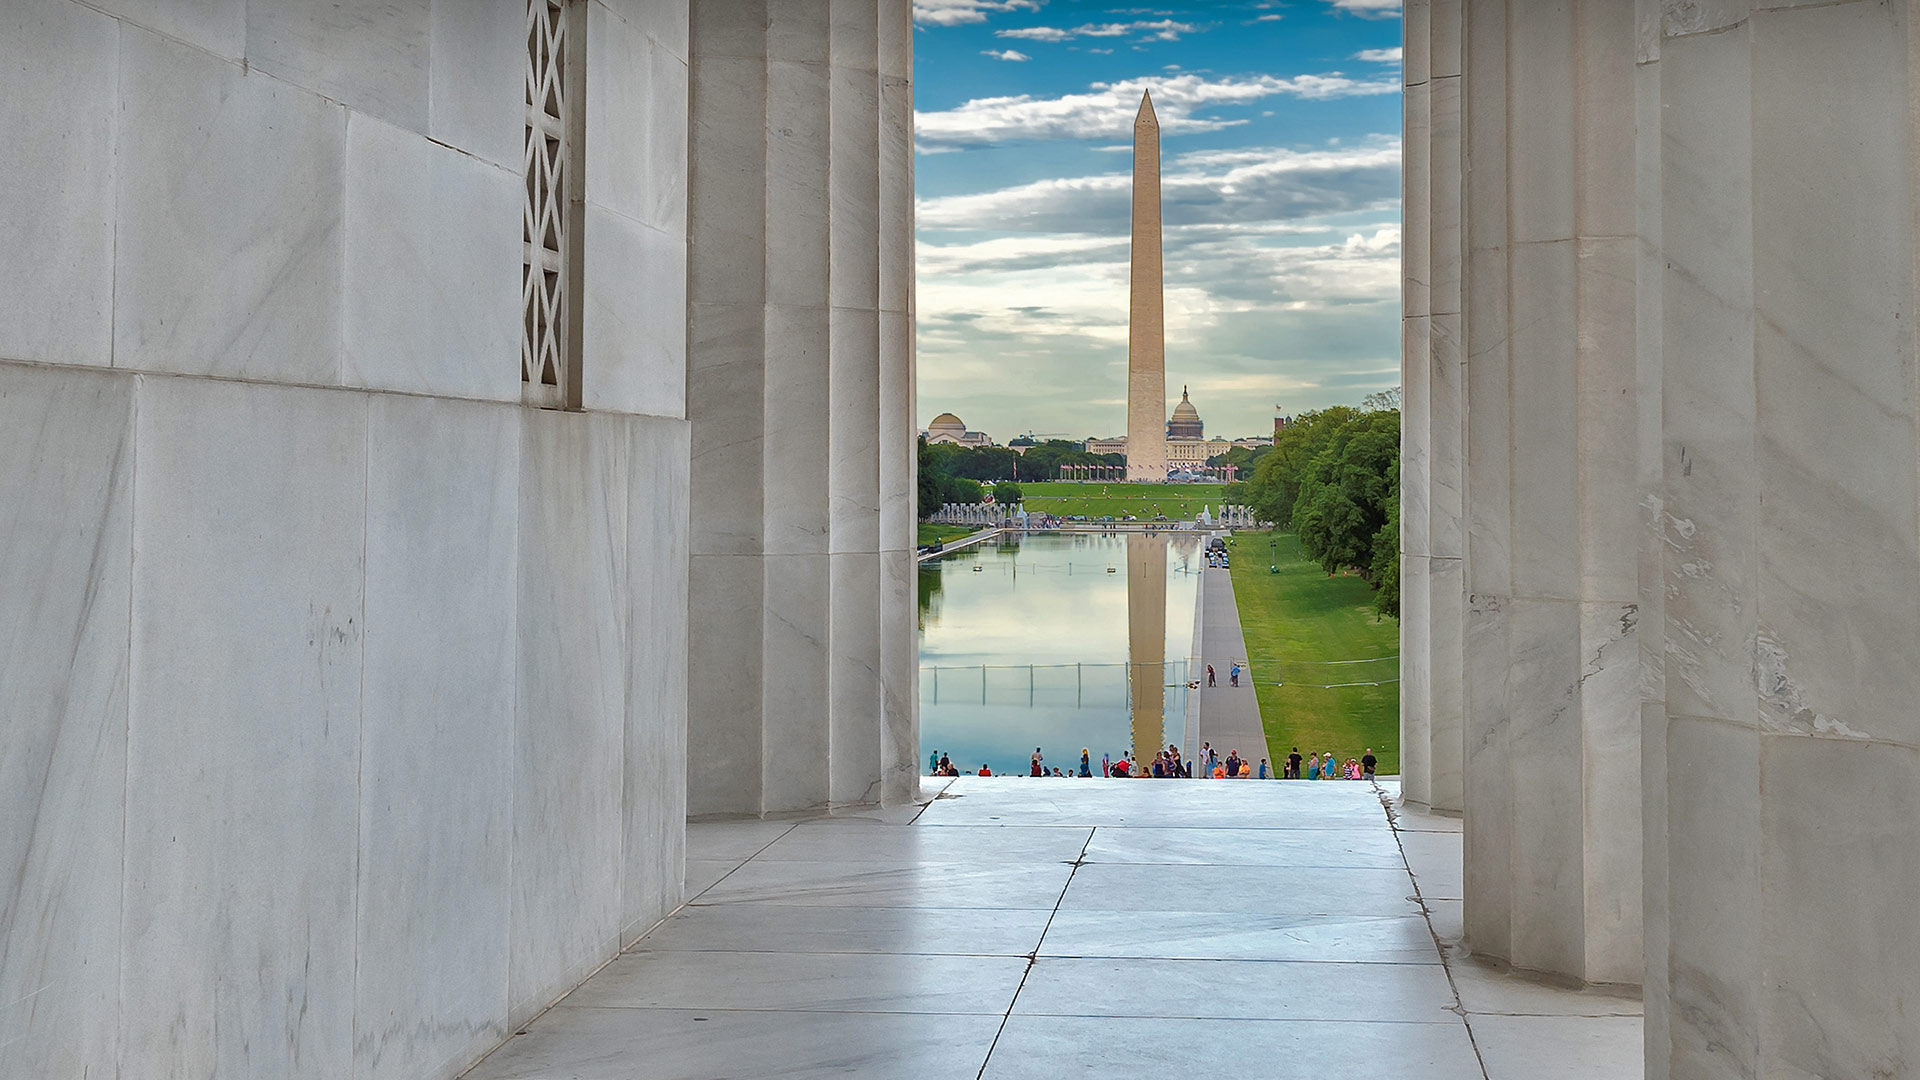 The Washington Monument seen from the Lincoln Memorial in Washington, DC - lucky-photographer/Getty Images)